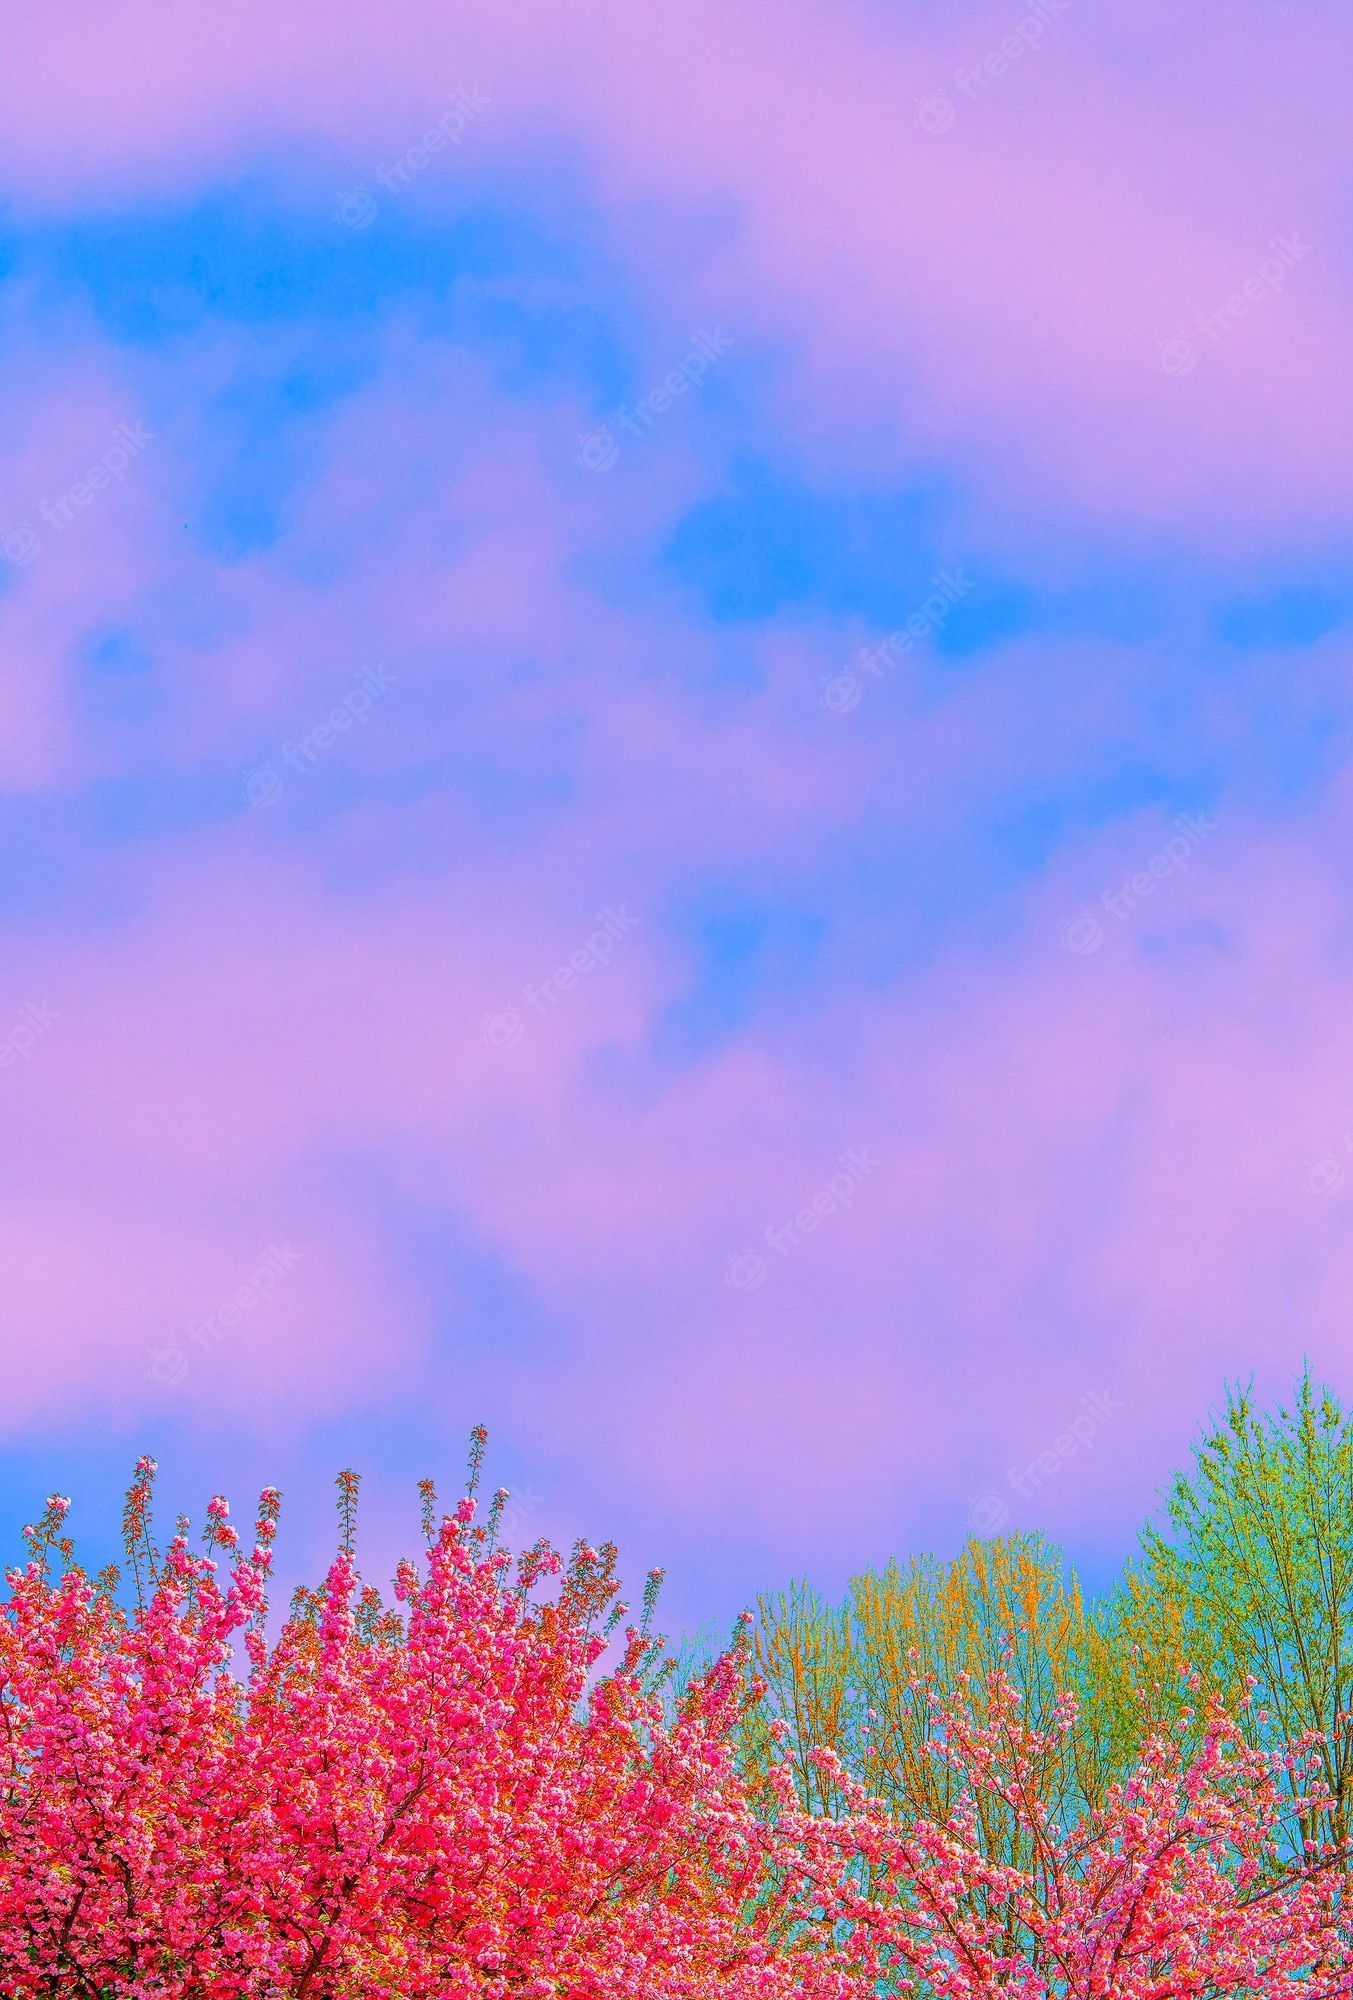 Aesthetic Spring Wallpaper Picture